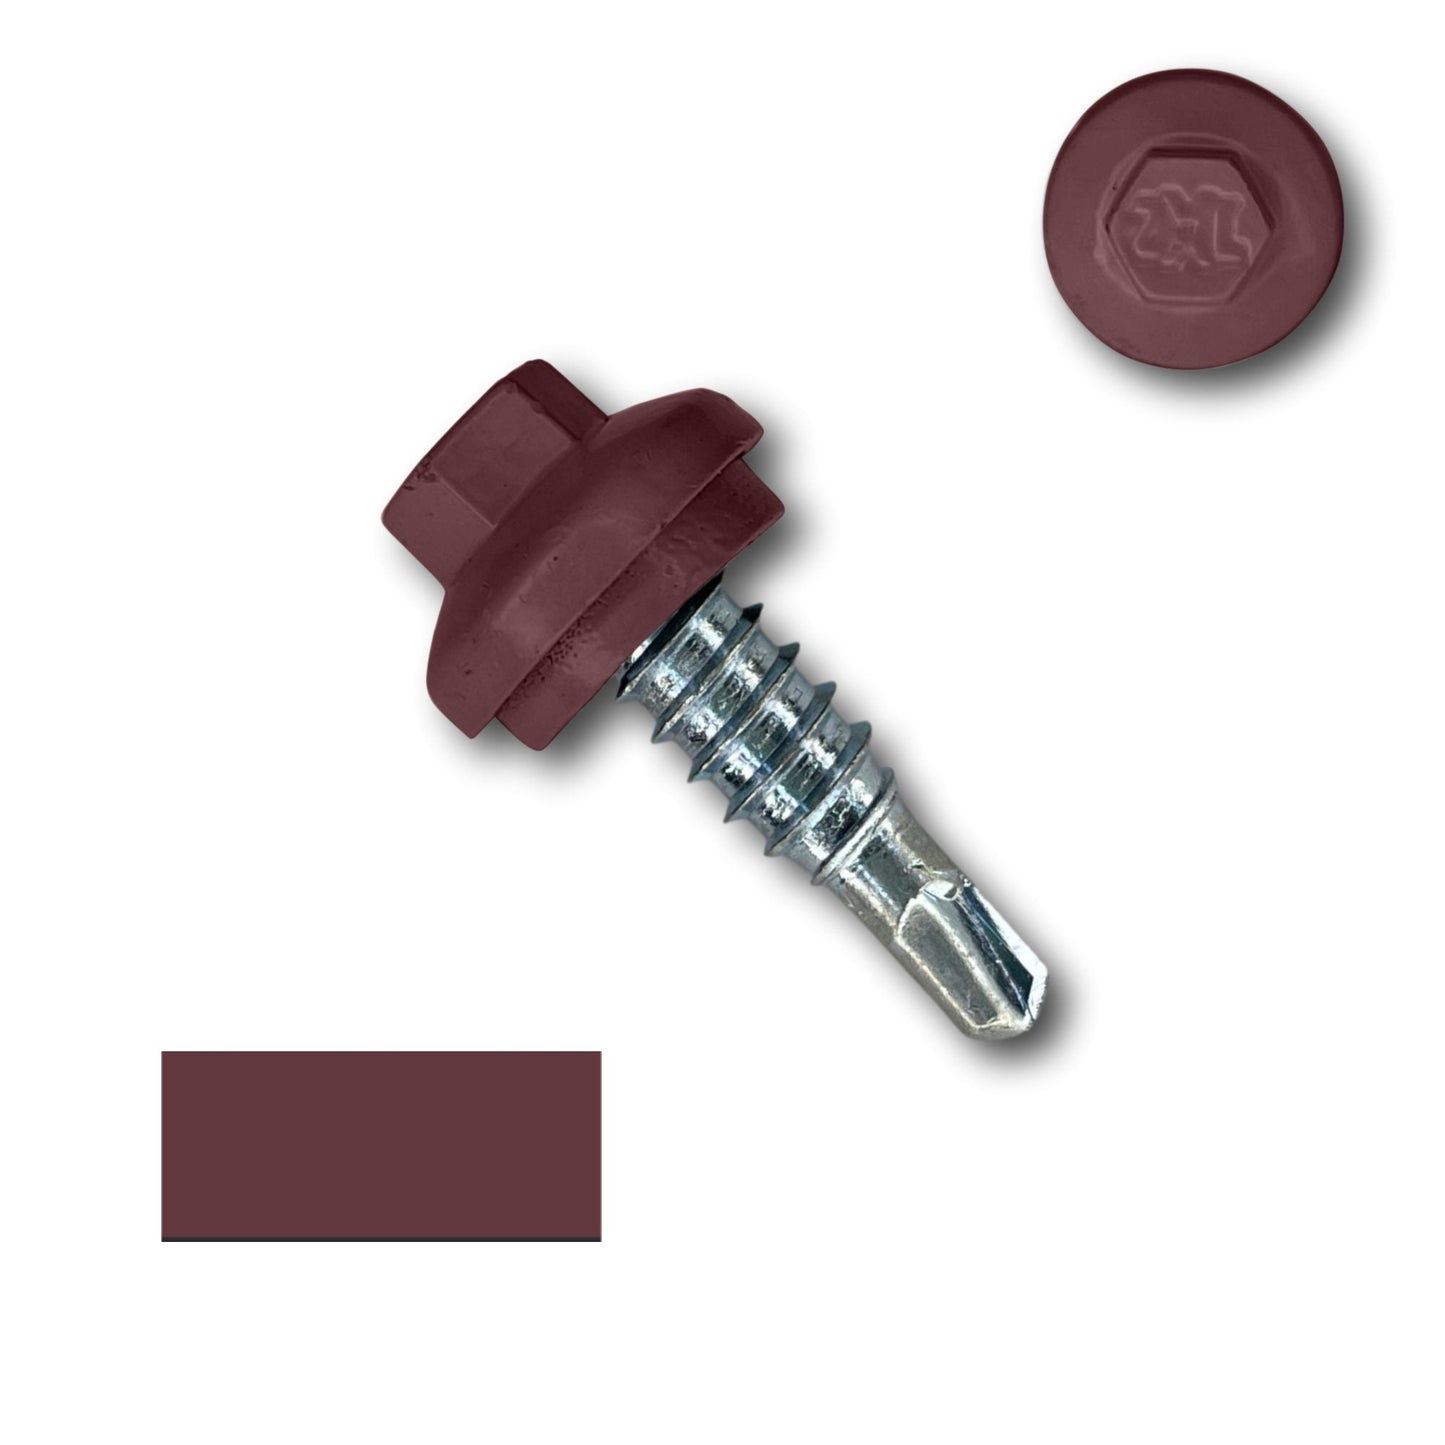 A self-drilling screw with a maroon hexagonal head and a metal threaded shaft is shown. Included are a swatch of maroon color and a close-up of the head, displaying a hexagonal imprint pattern. Ideal for secure fastening, this #14 x 7/8" Stitch Lap ZXL Dome Cap Metal Building Screws, Self-Drilling - 250 Pack by Perma Cover ensures reliability in your projects.